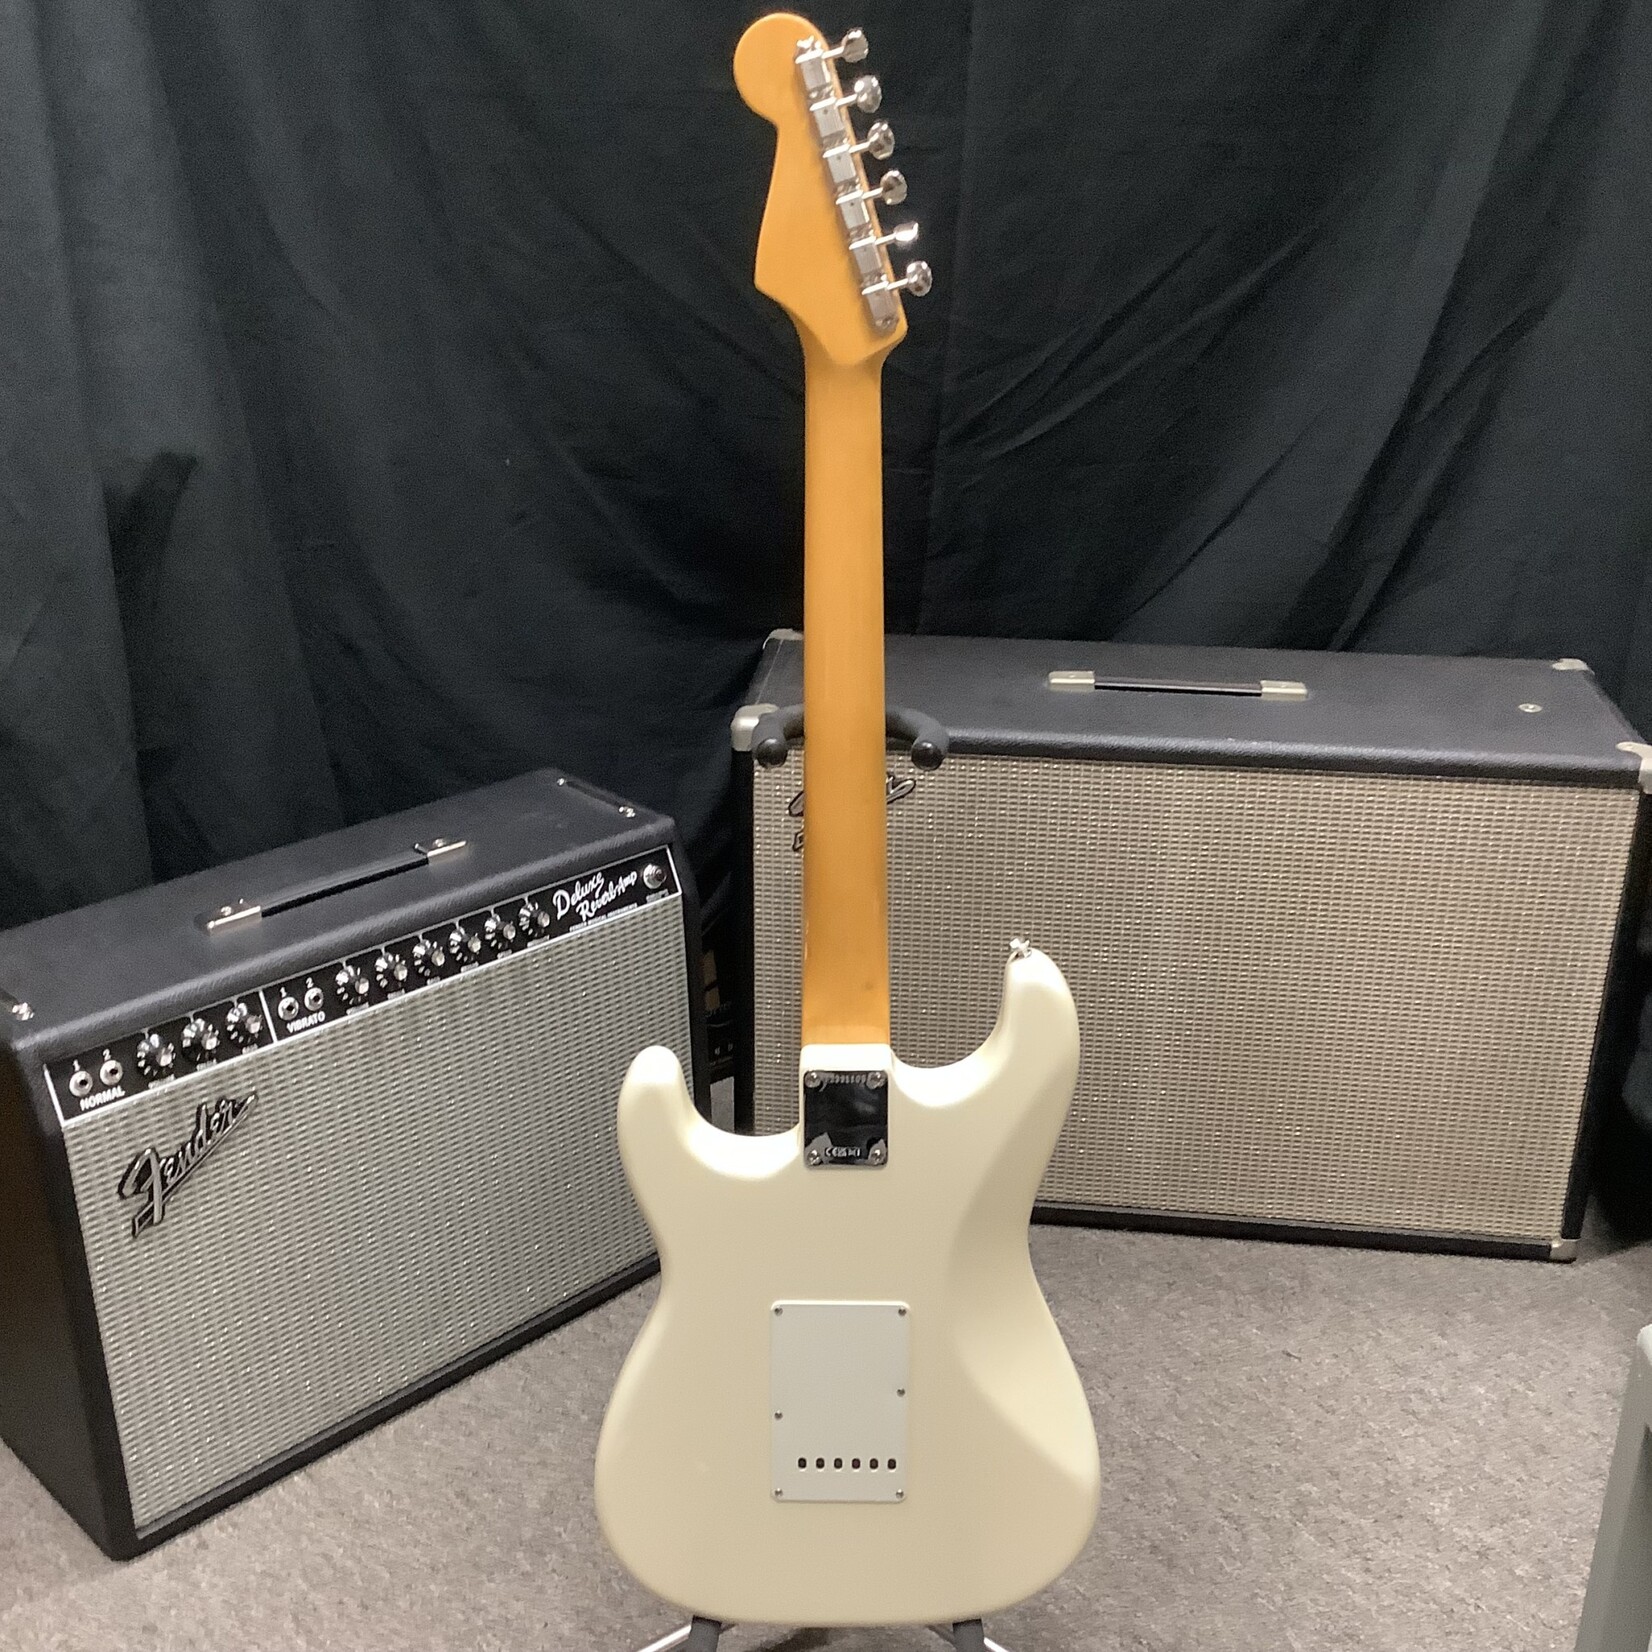 Fender American Professional II Stratocaster Review: Refining the